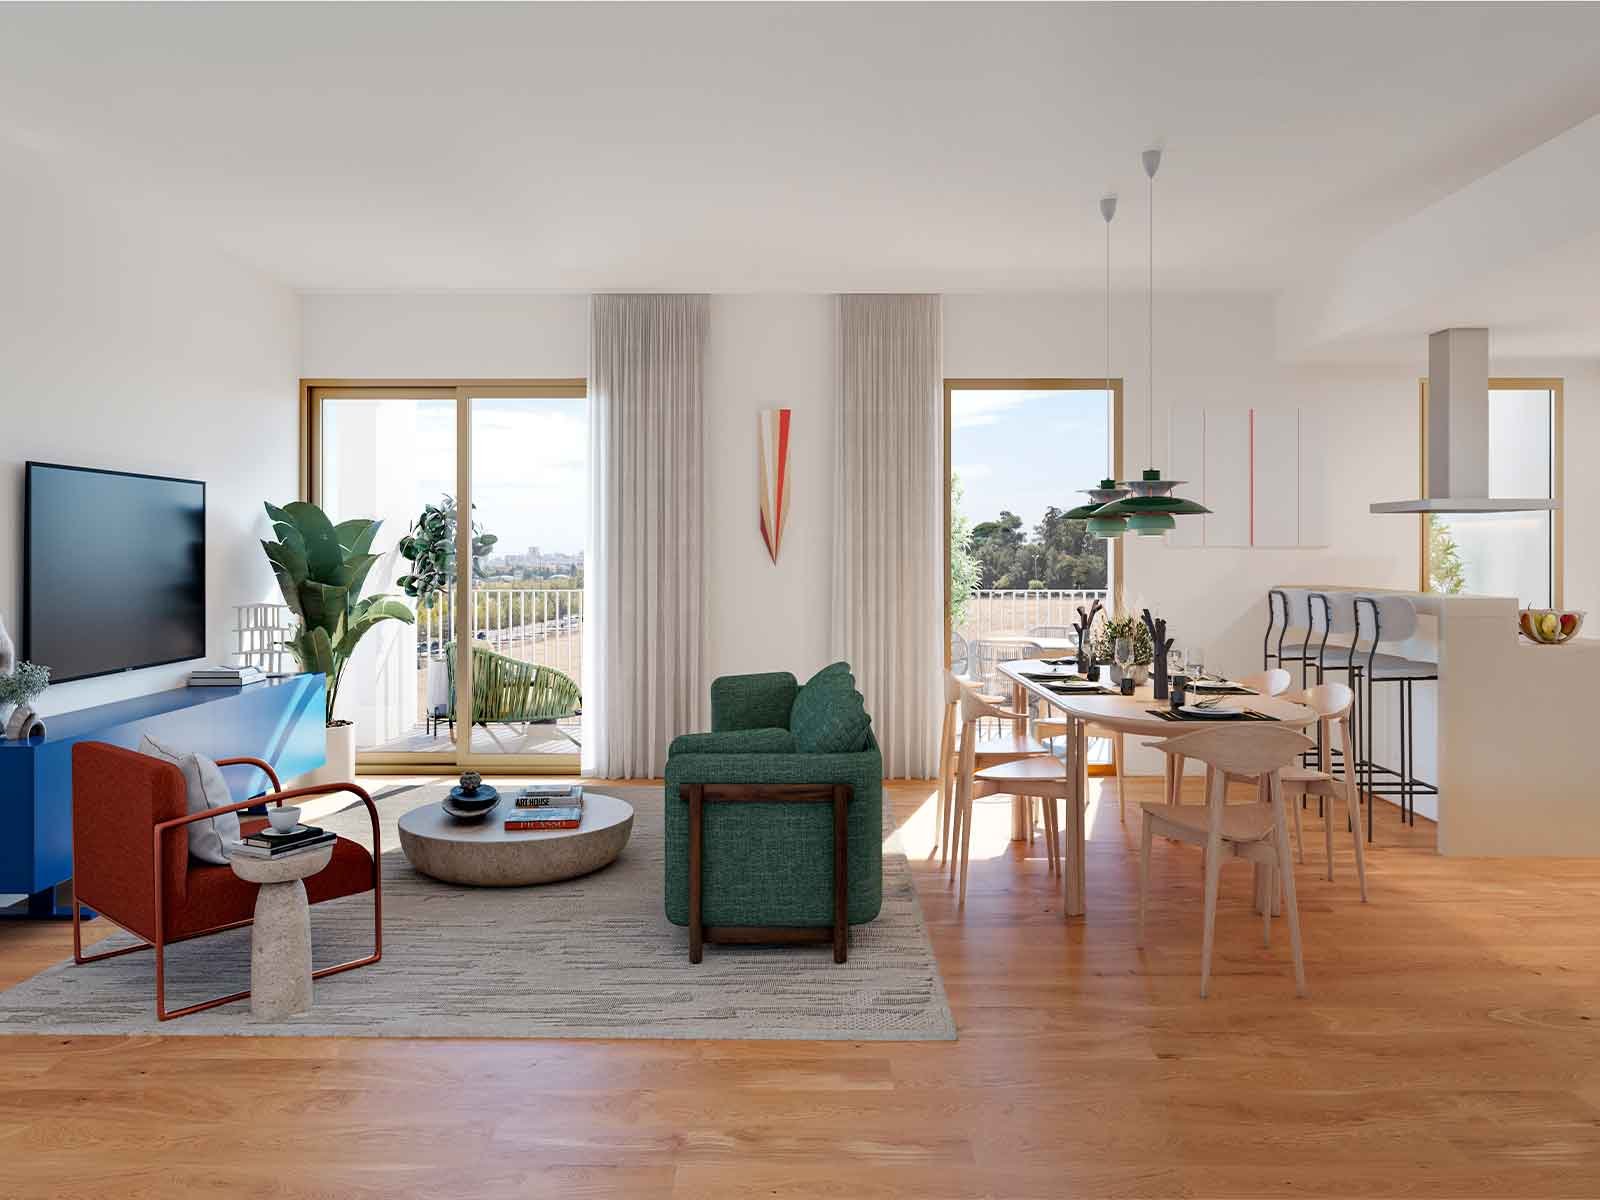 3 bedroom apartment with balcony and parking in new development, Lisbon 3040535256